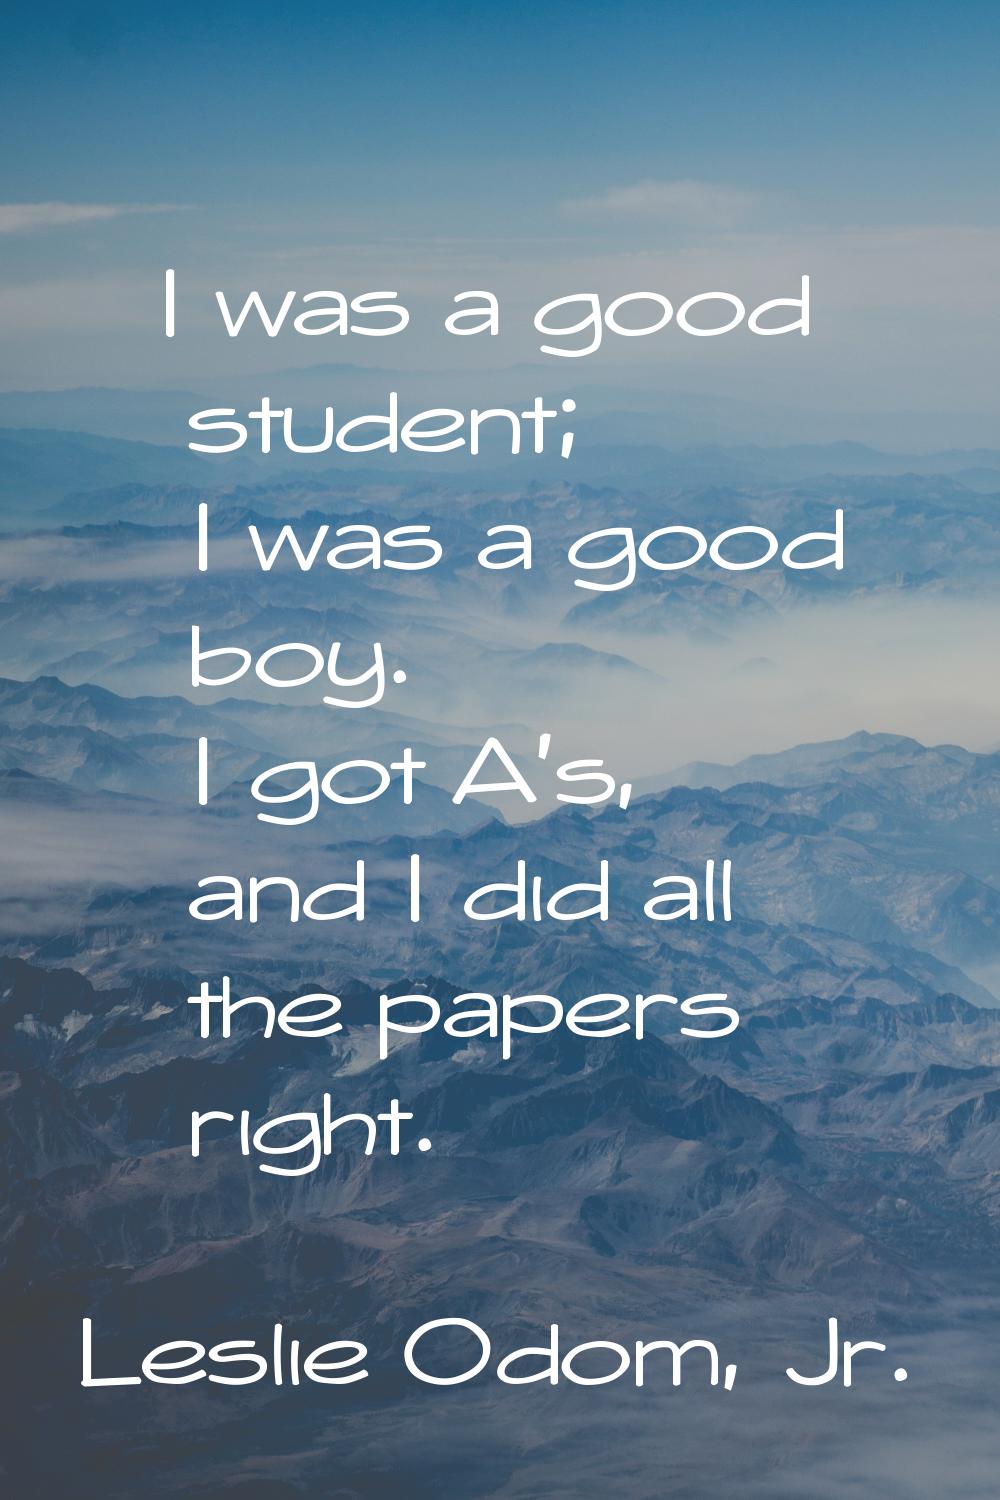 I was a good student; I was a good boy. I got A's, and I did all the papers right.